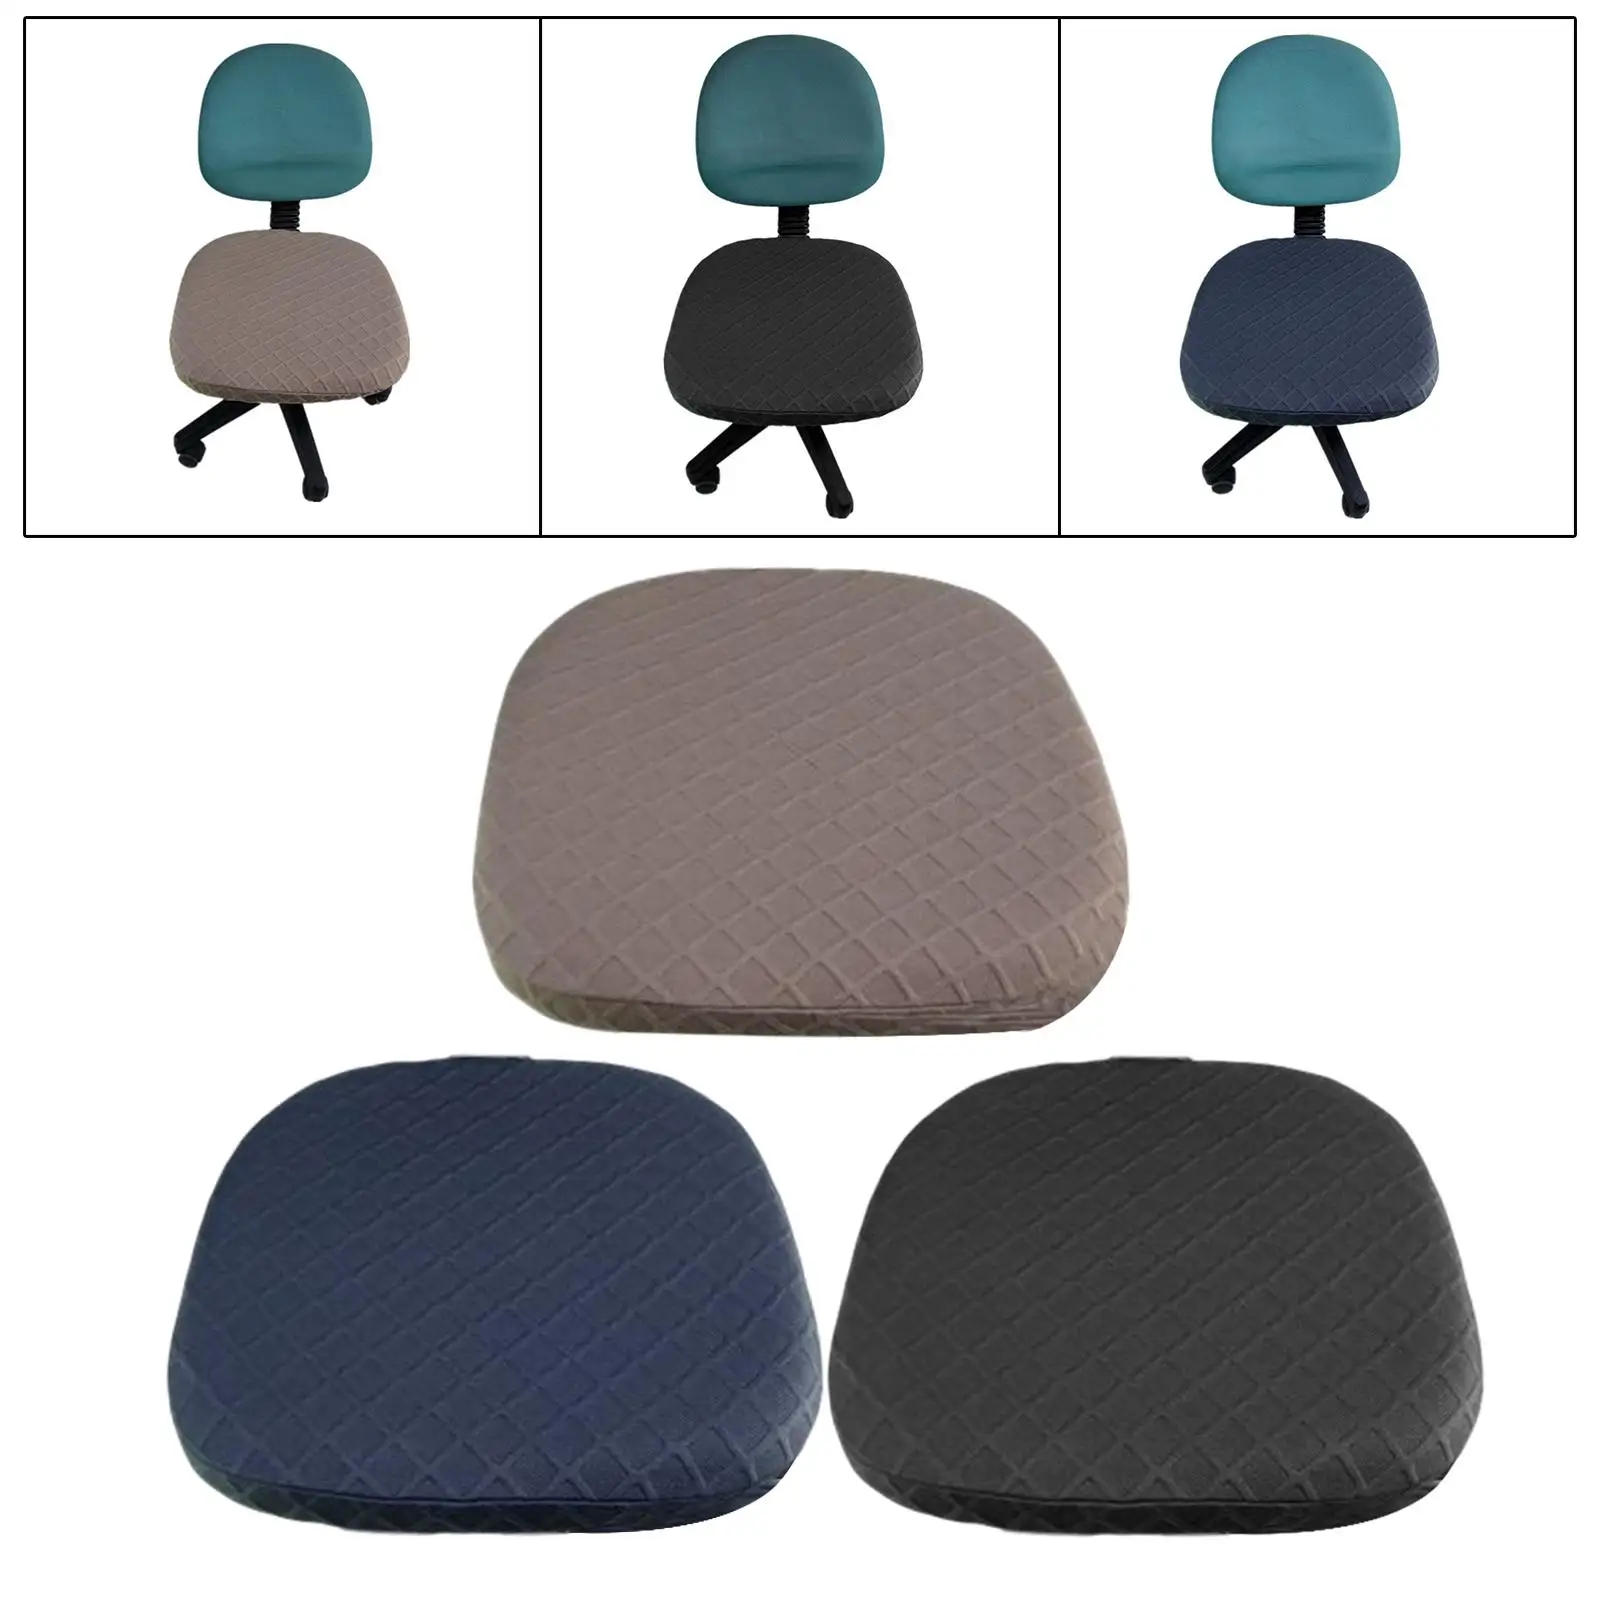 Stretch Jacquard Office Chair Seat Cushion Cover Protector Washable with Elastic Band Reusable Wrinkle Resistance Durable Fabric